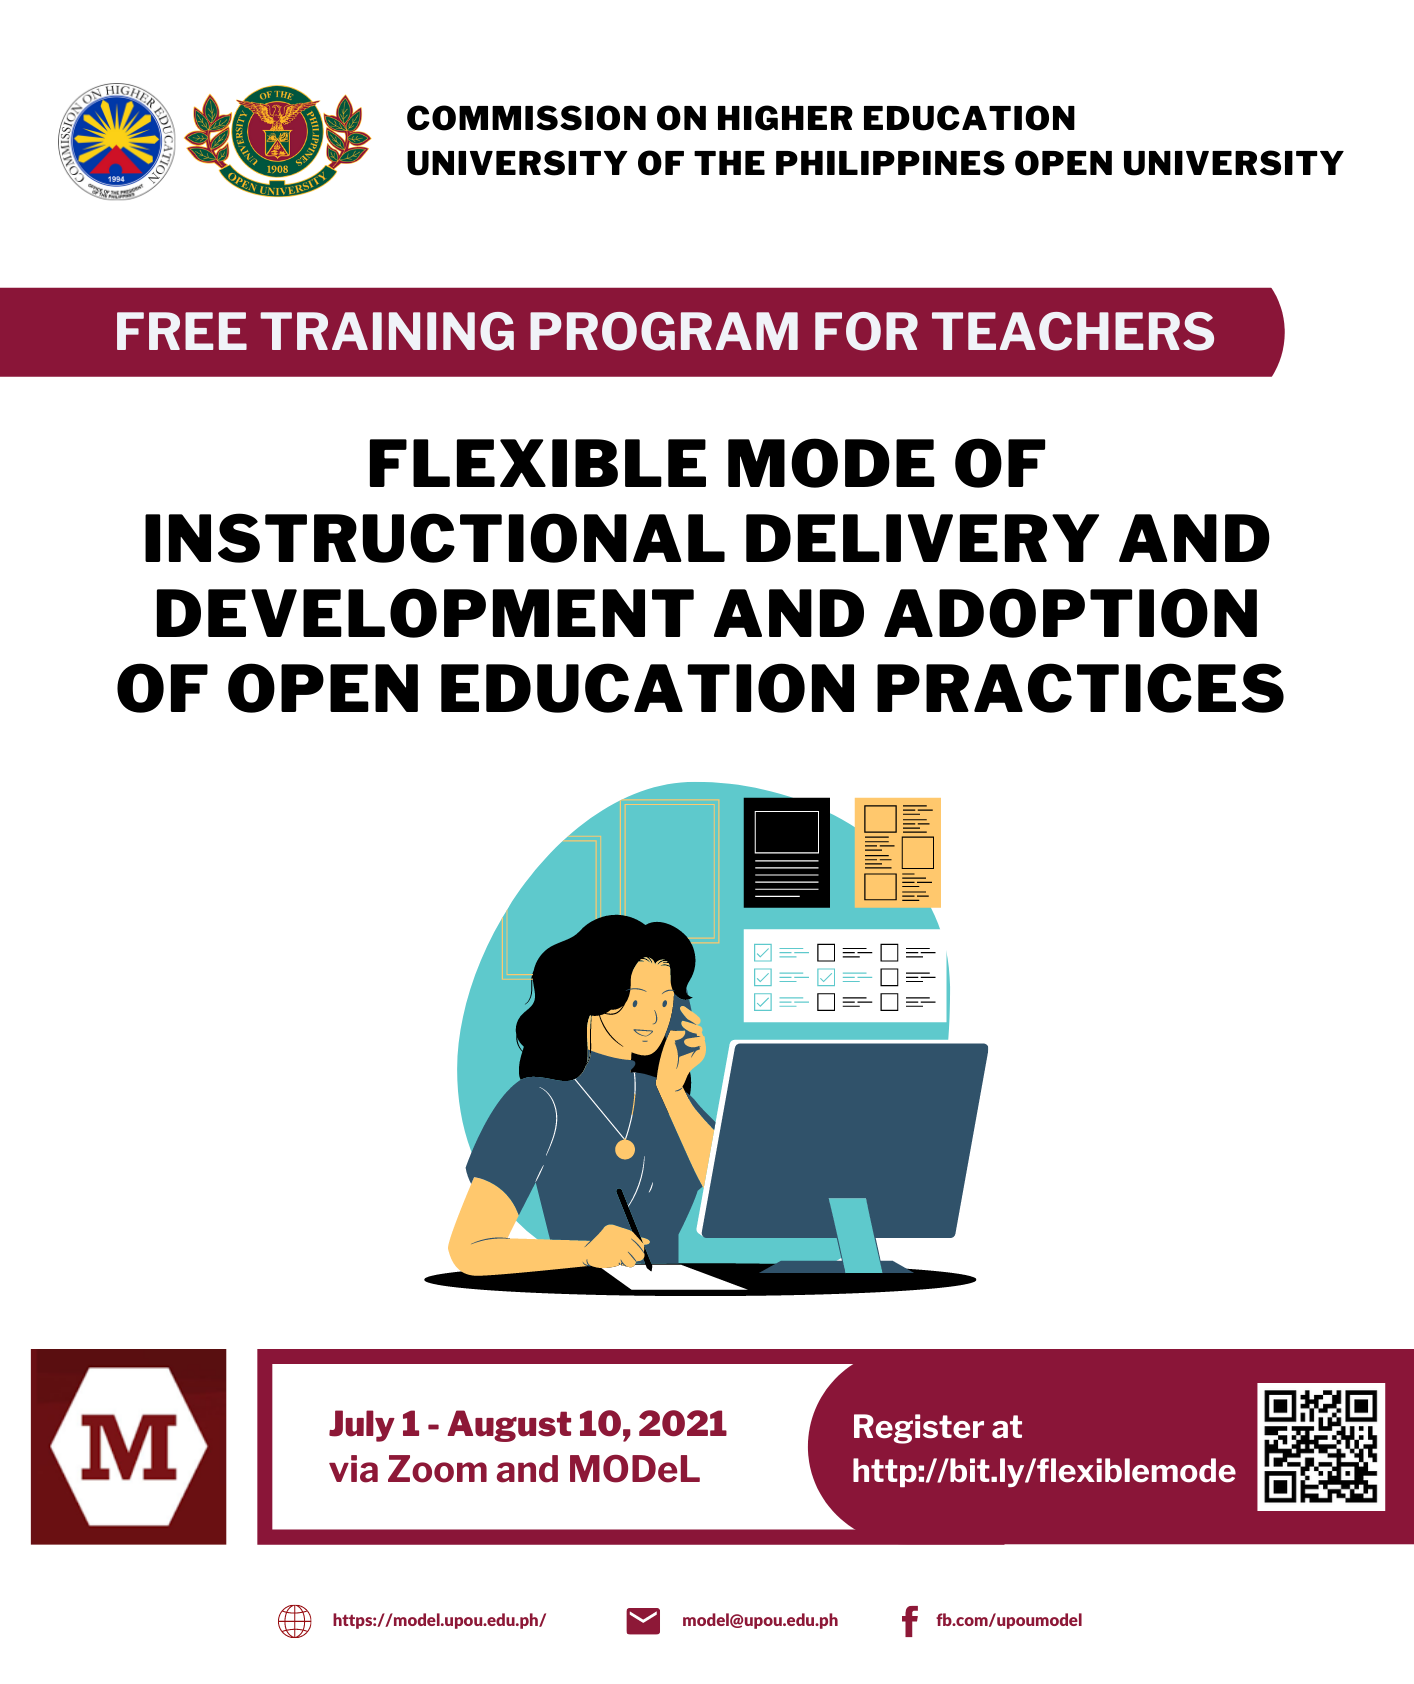 Training of Teachers on Flexible Mode of Instructional Delivery and Development and Adoption of Open Education Practices for Quality Tertiary Education